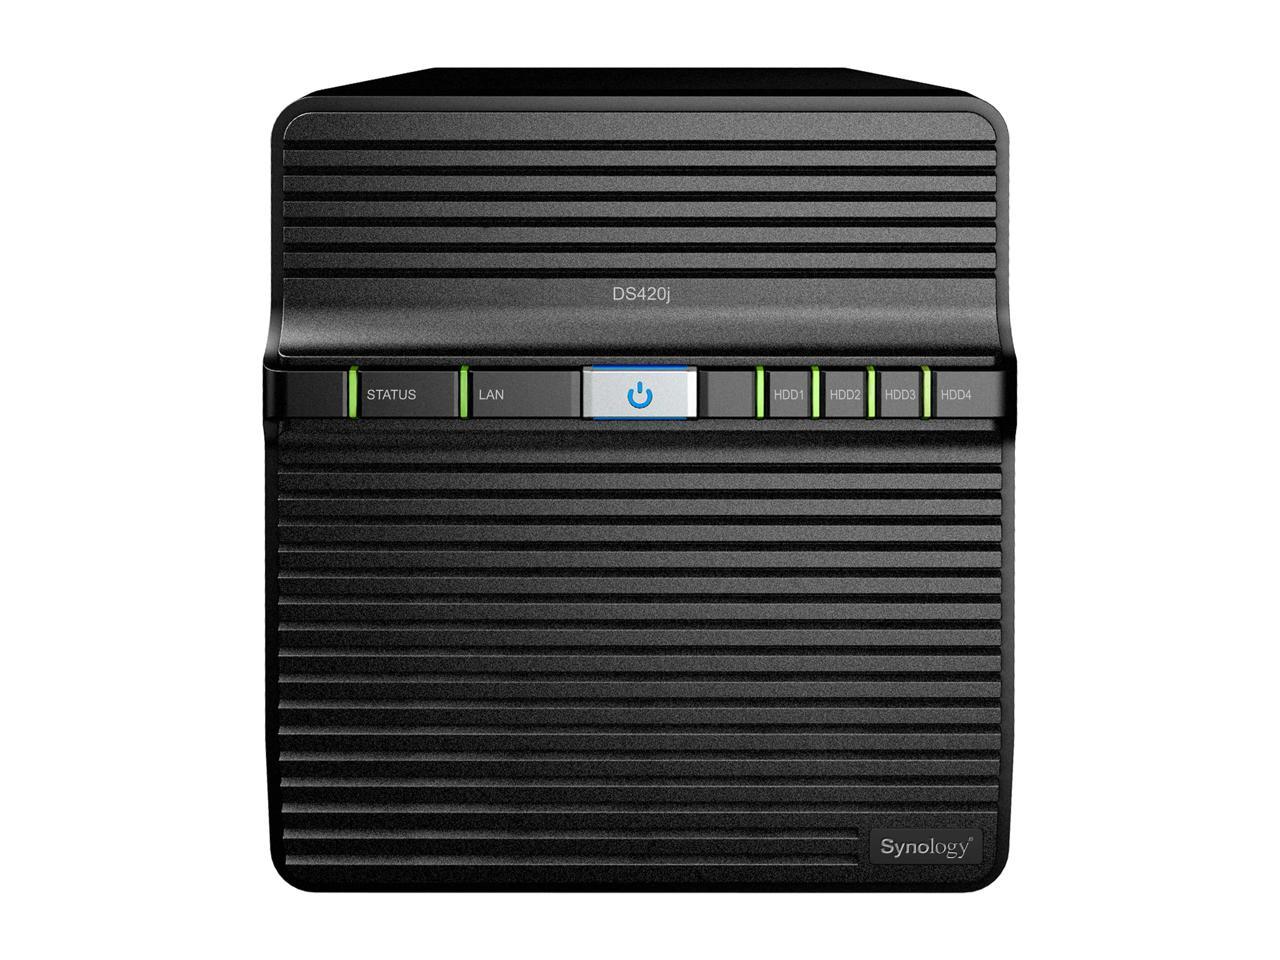 Synology DS420j Network Storage